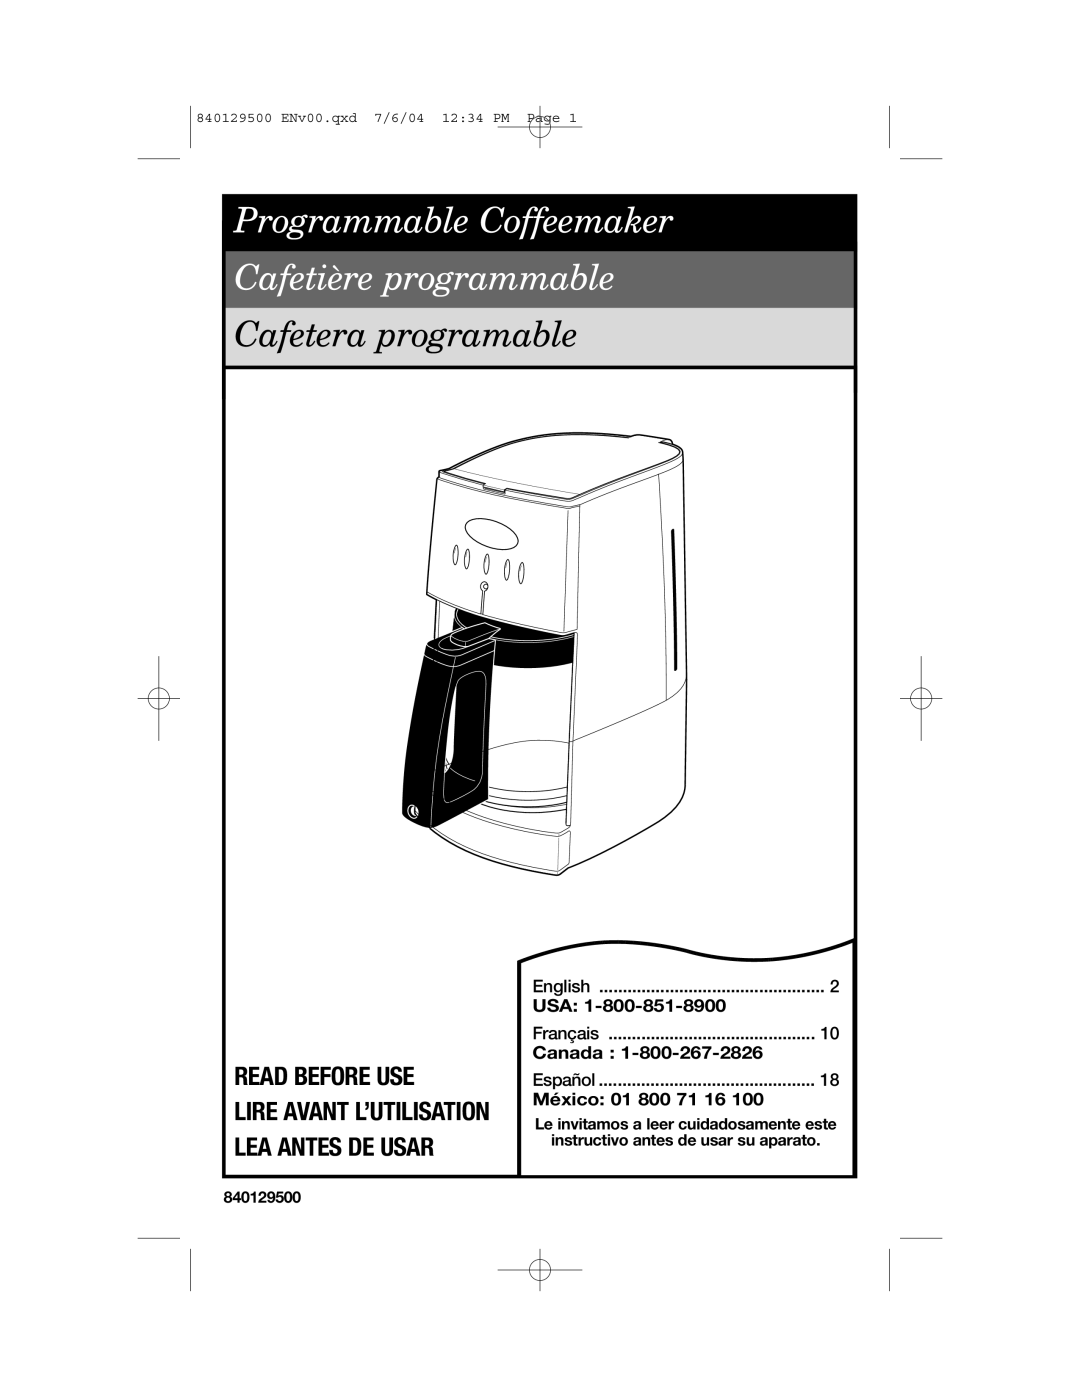 Hamilton Beach 43251 manual Read Before Use, Programmable Coffeemaker Cafetière programmable, Cafetera programable, Canada 